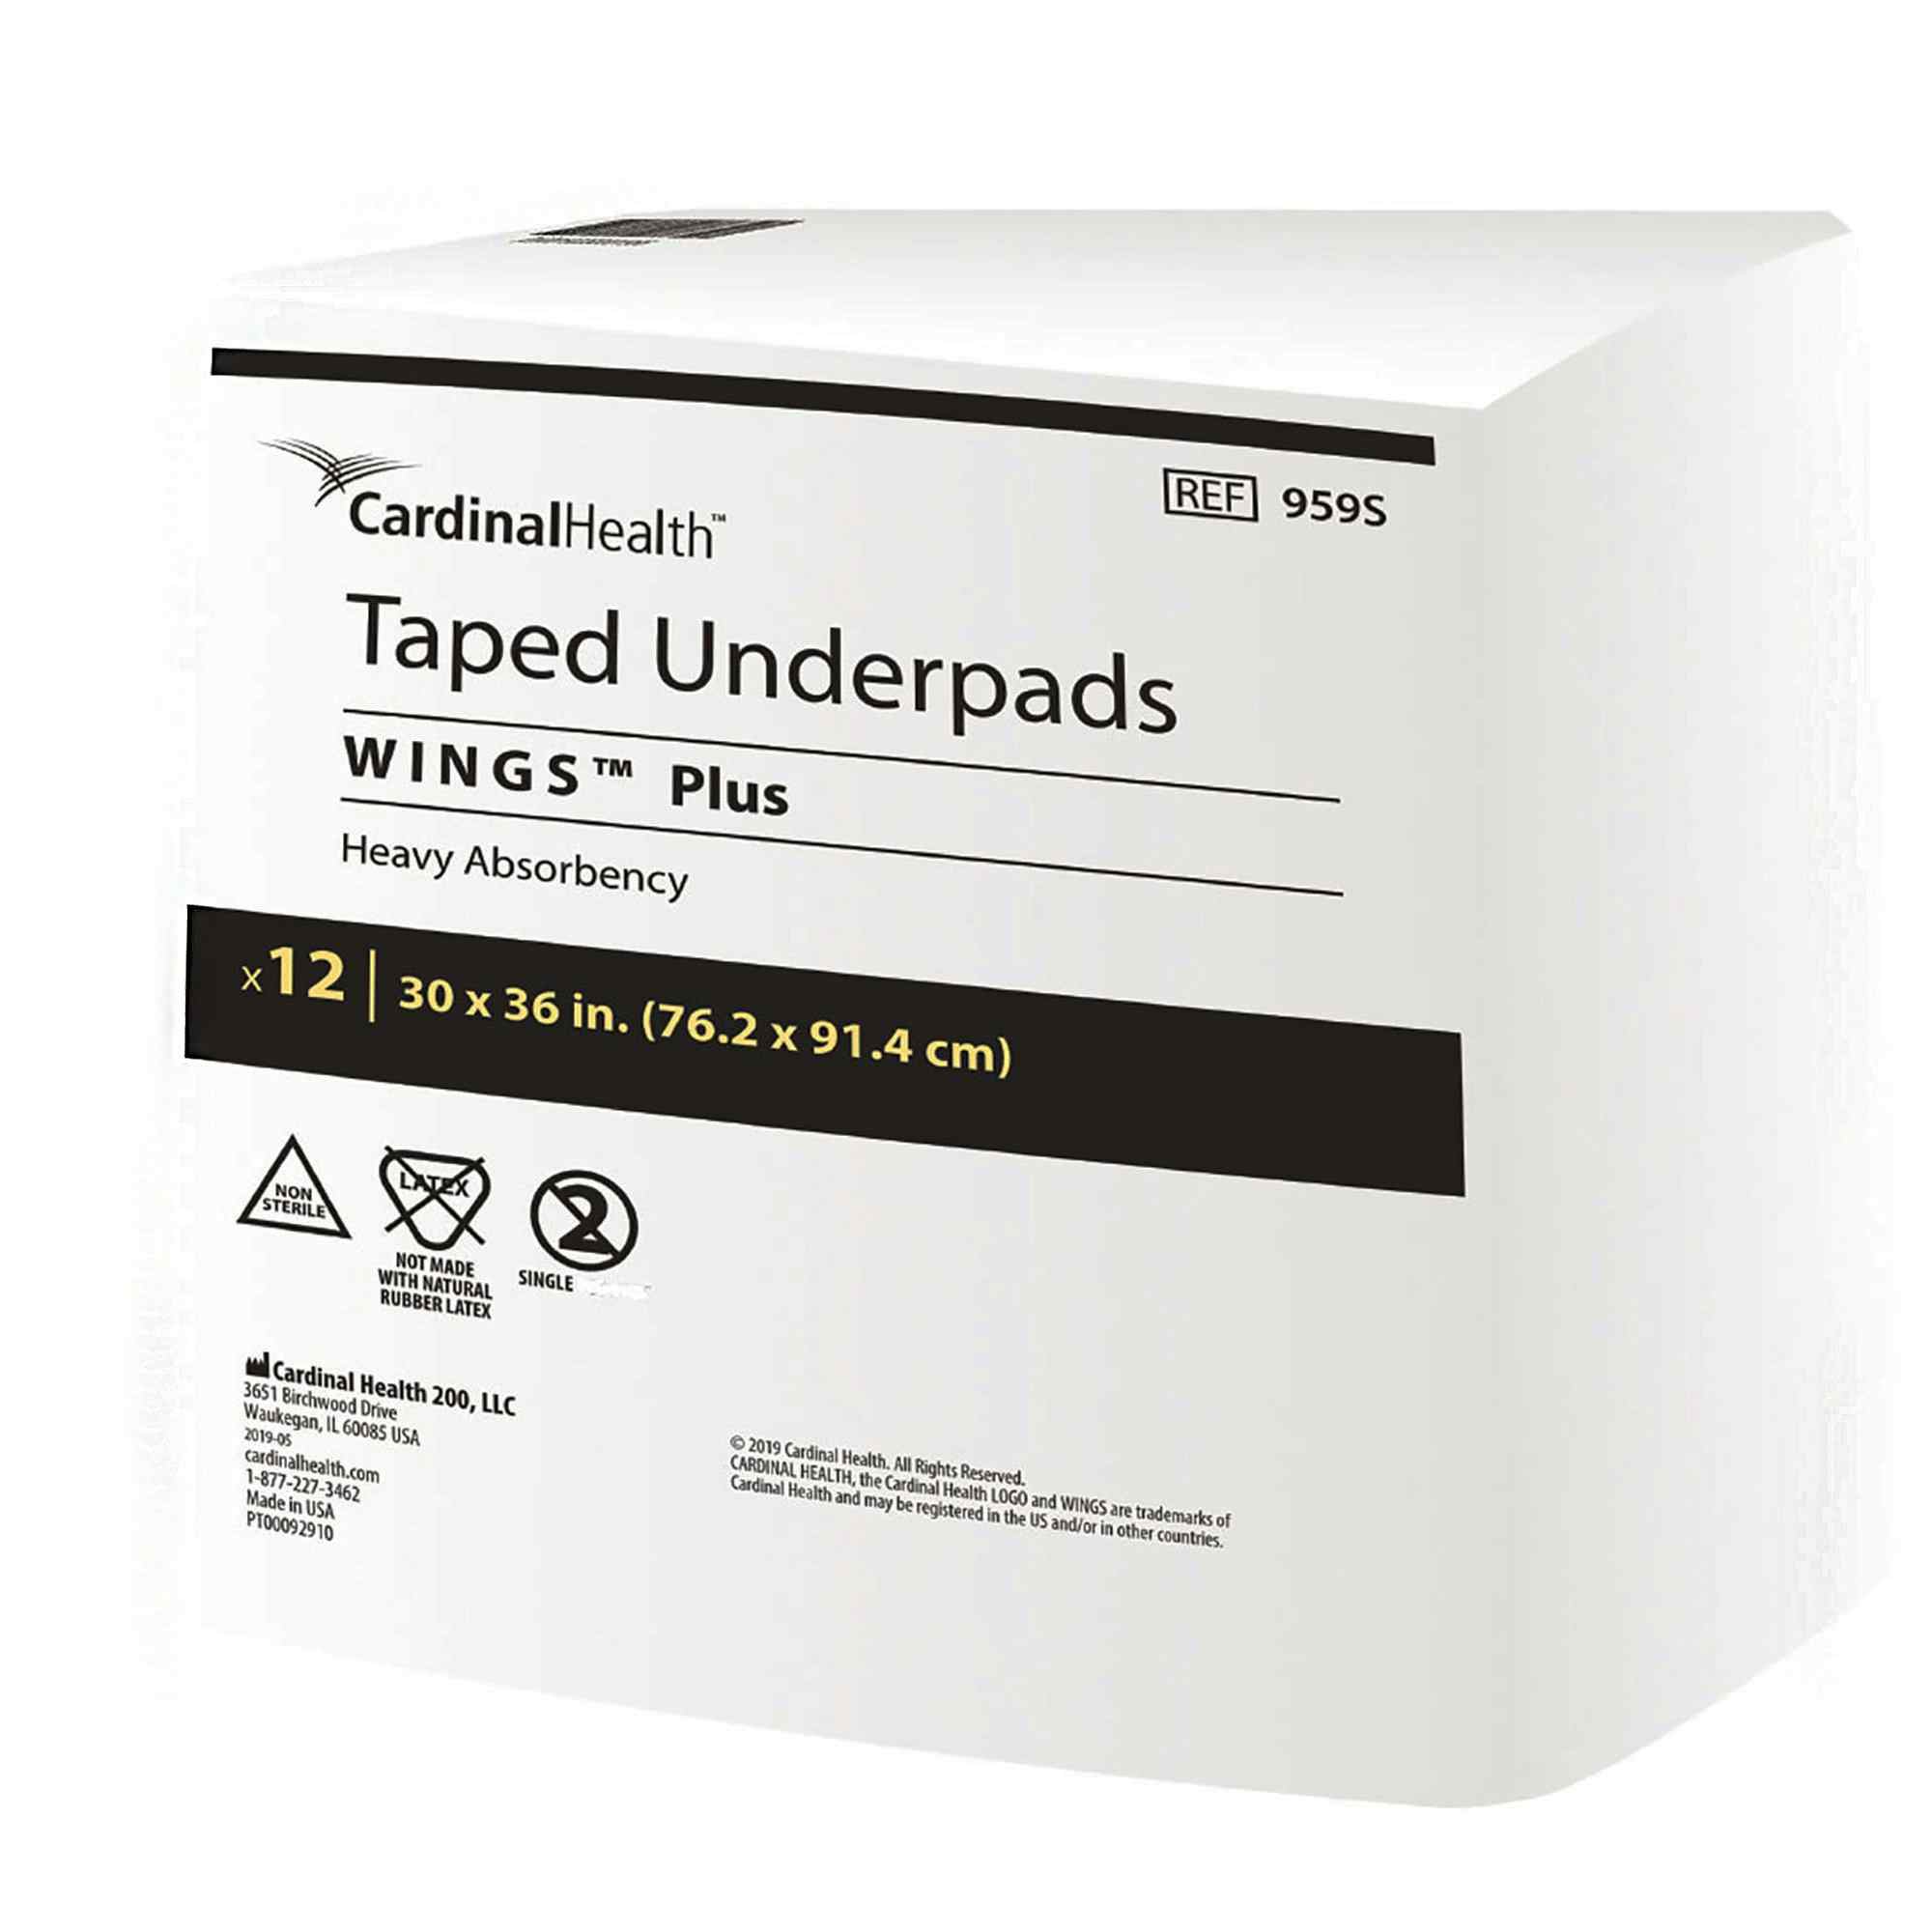 Wings Specialty Disposable Underpad, Heavy Absorbency, 959S, 30 X 36" - Case of 96 Pads (8 Bags)